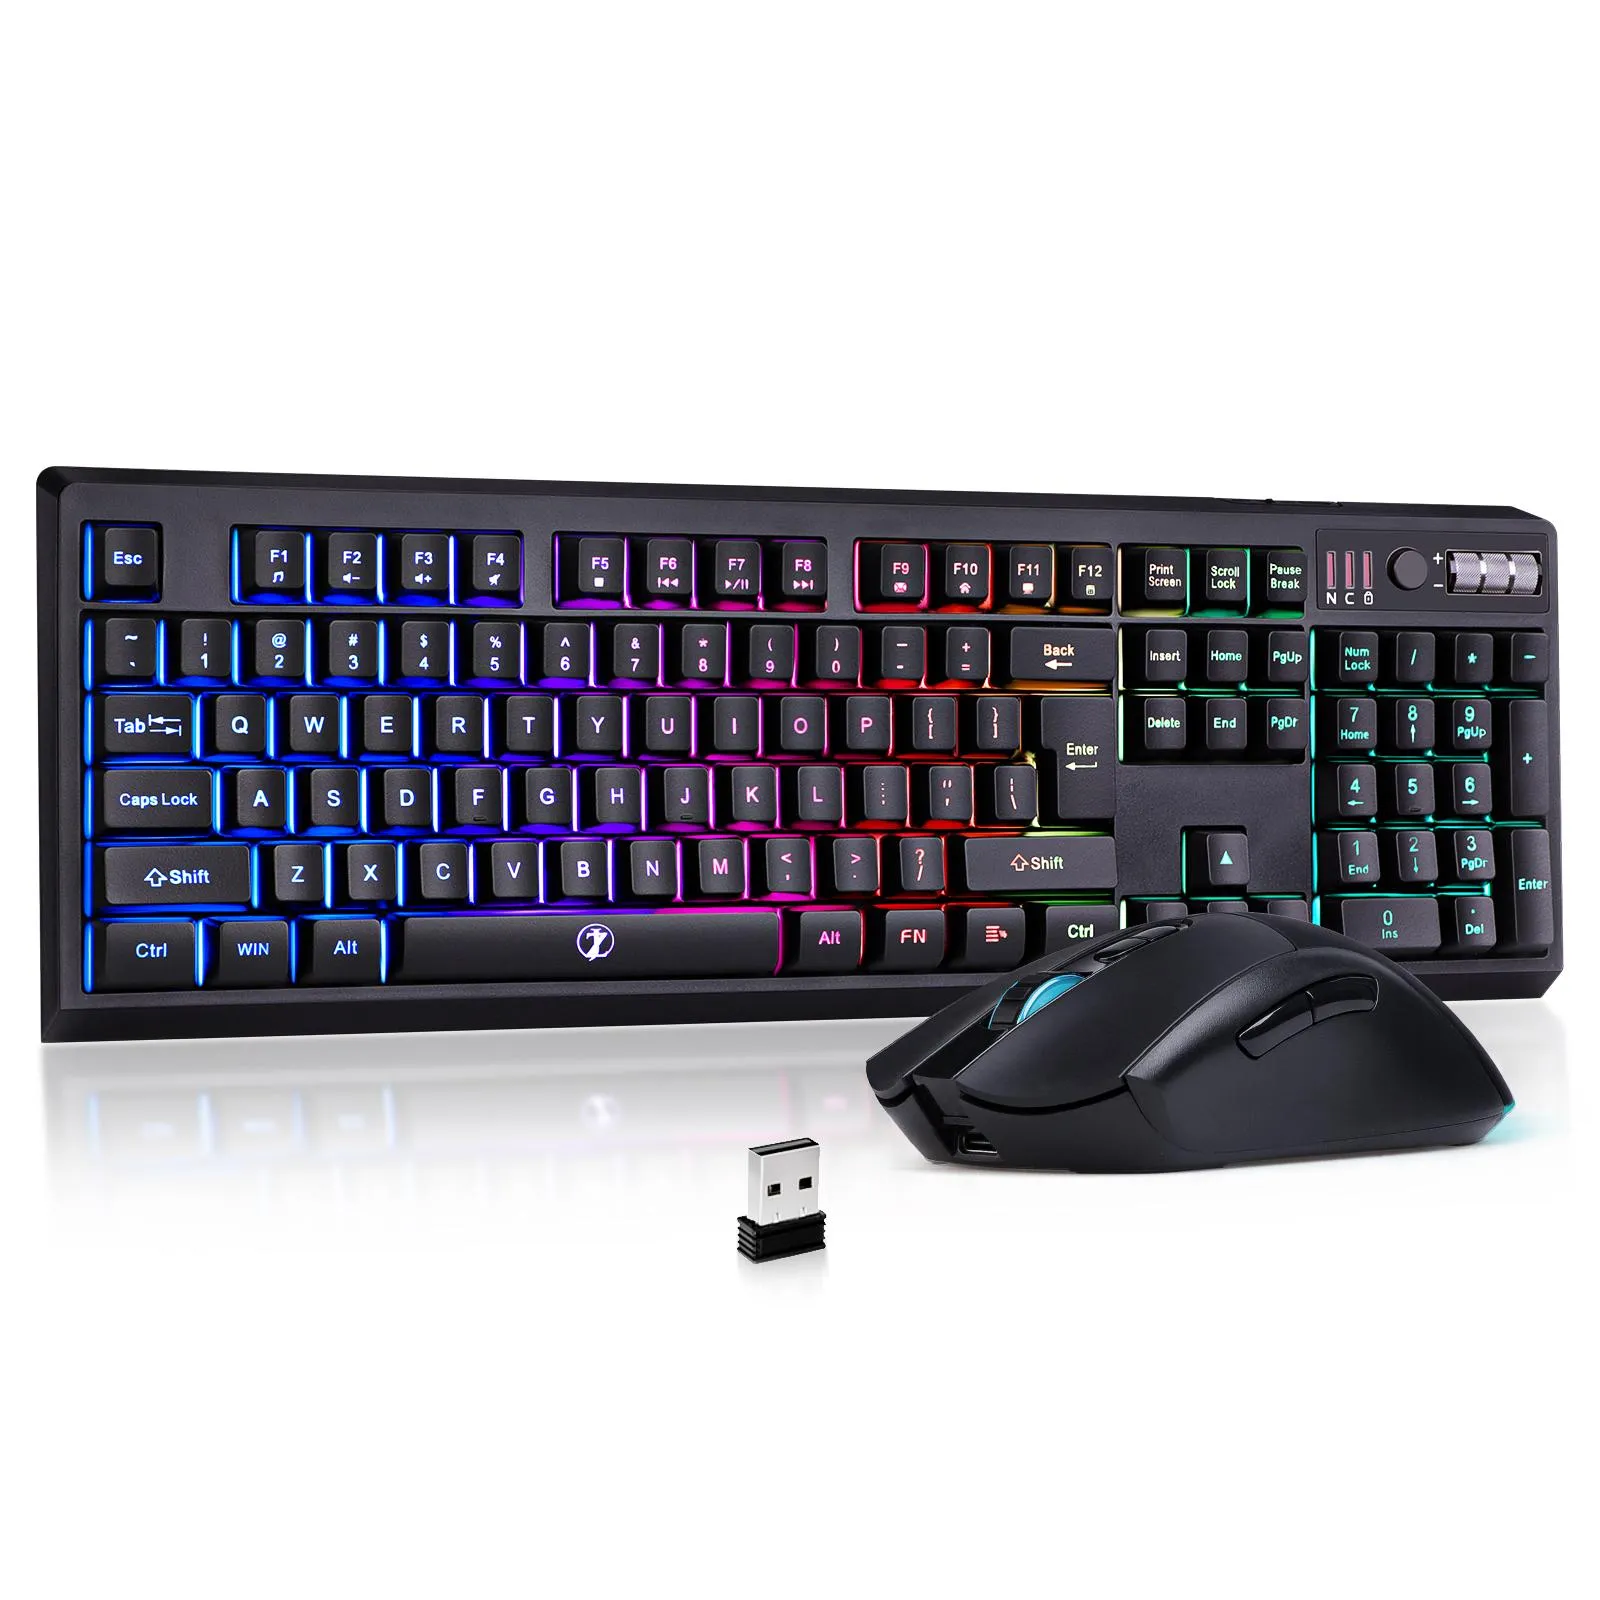 Combos ZJFKSDYX Wireless Gaming Keyboard and Mouse Combo 104 Key RGB LED Backlight Rechargeable Mechanical Feel Antighosting Ergonomic